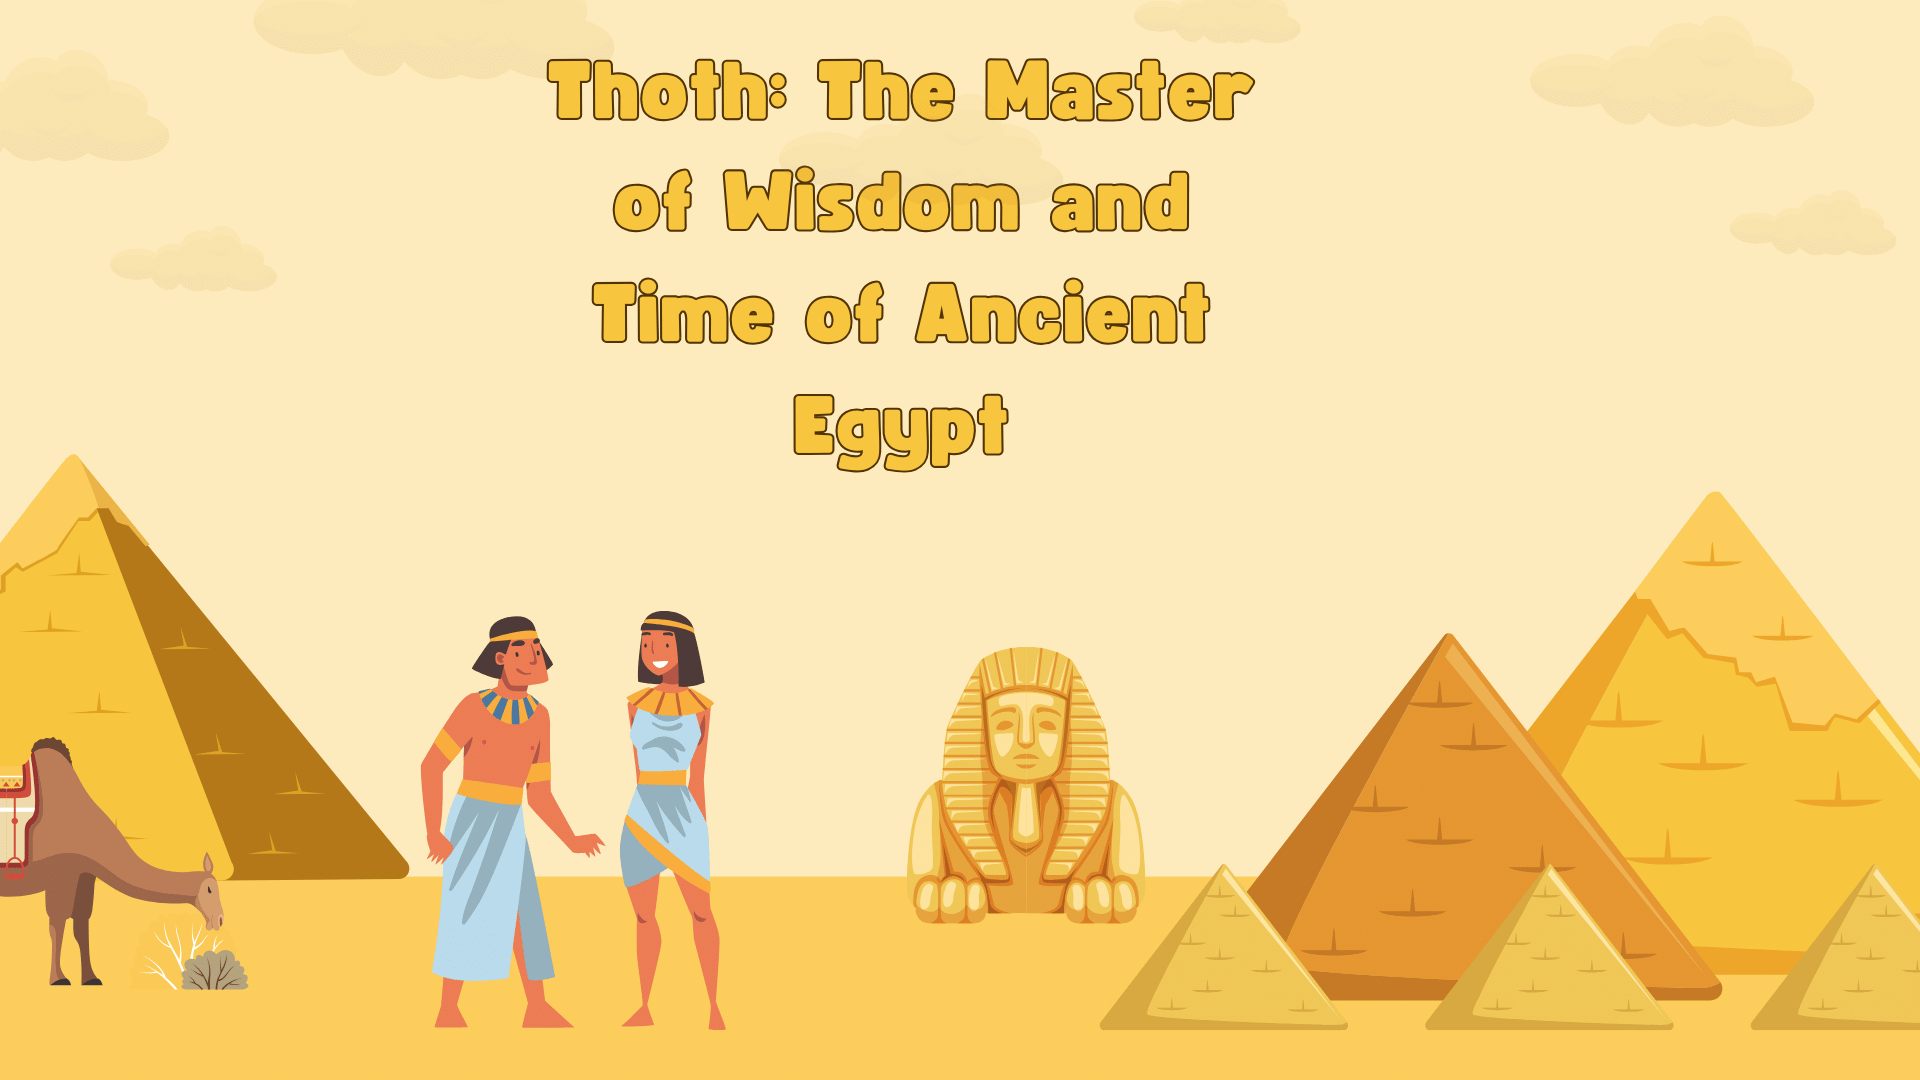 Thoth: The Master of Wisdom and Time of Ancient Egypt